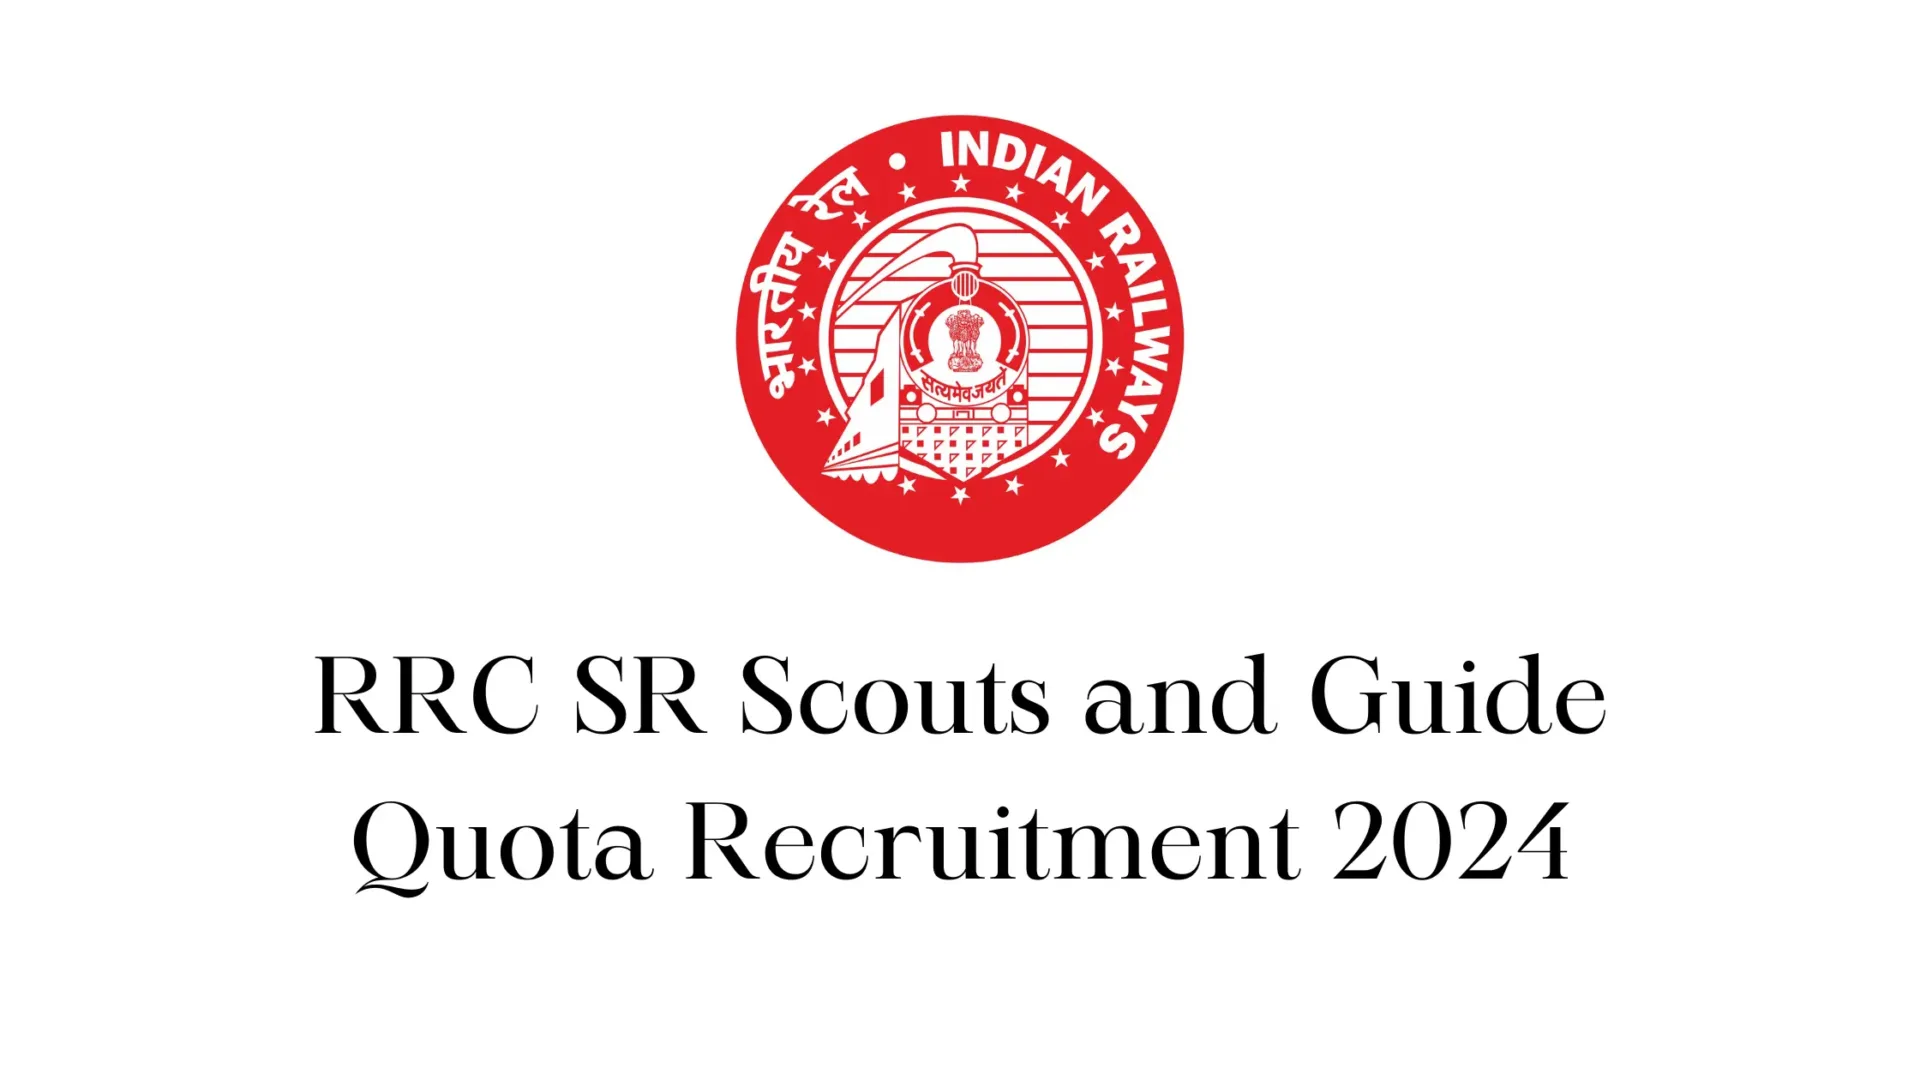 RRC SR Scouts and Guide Quota Recruitment 2024